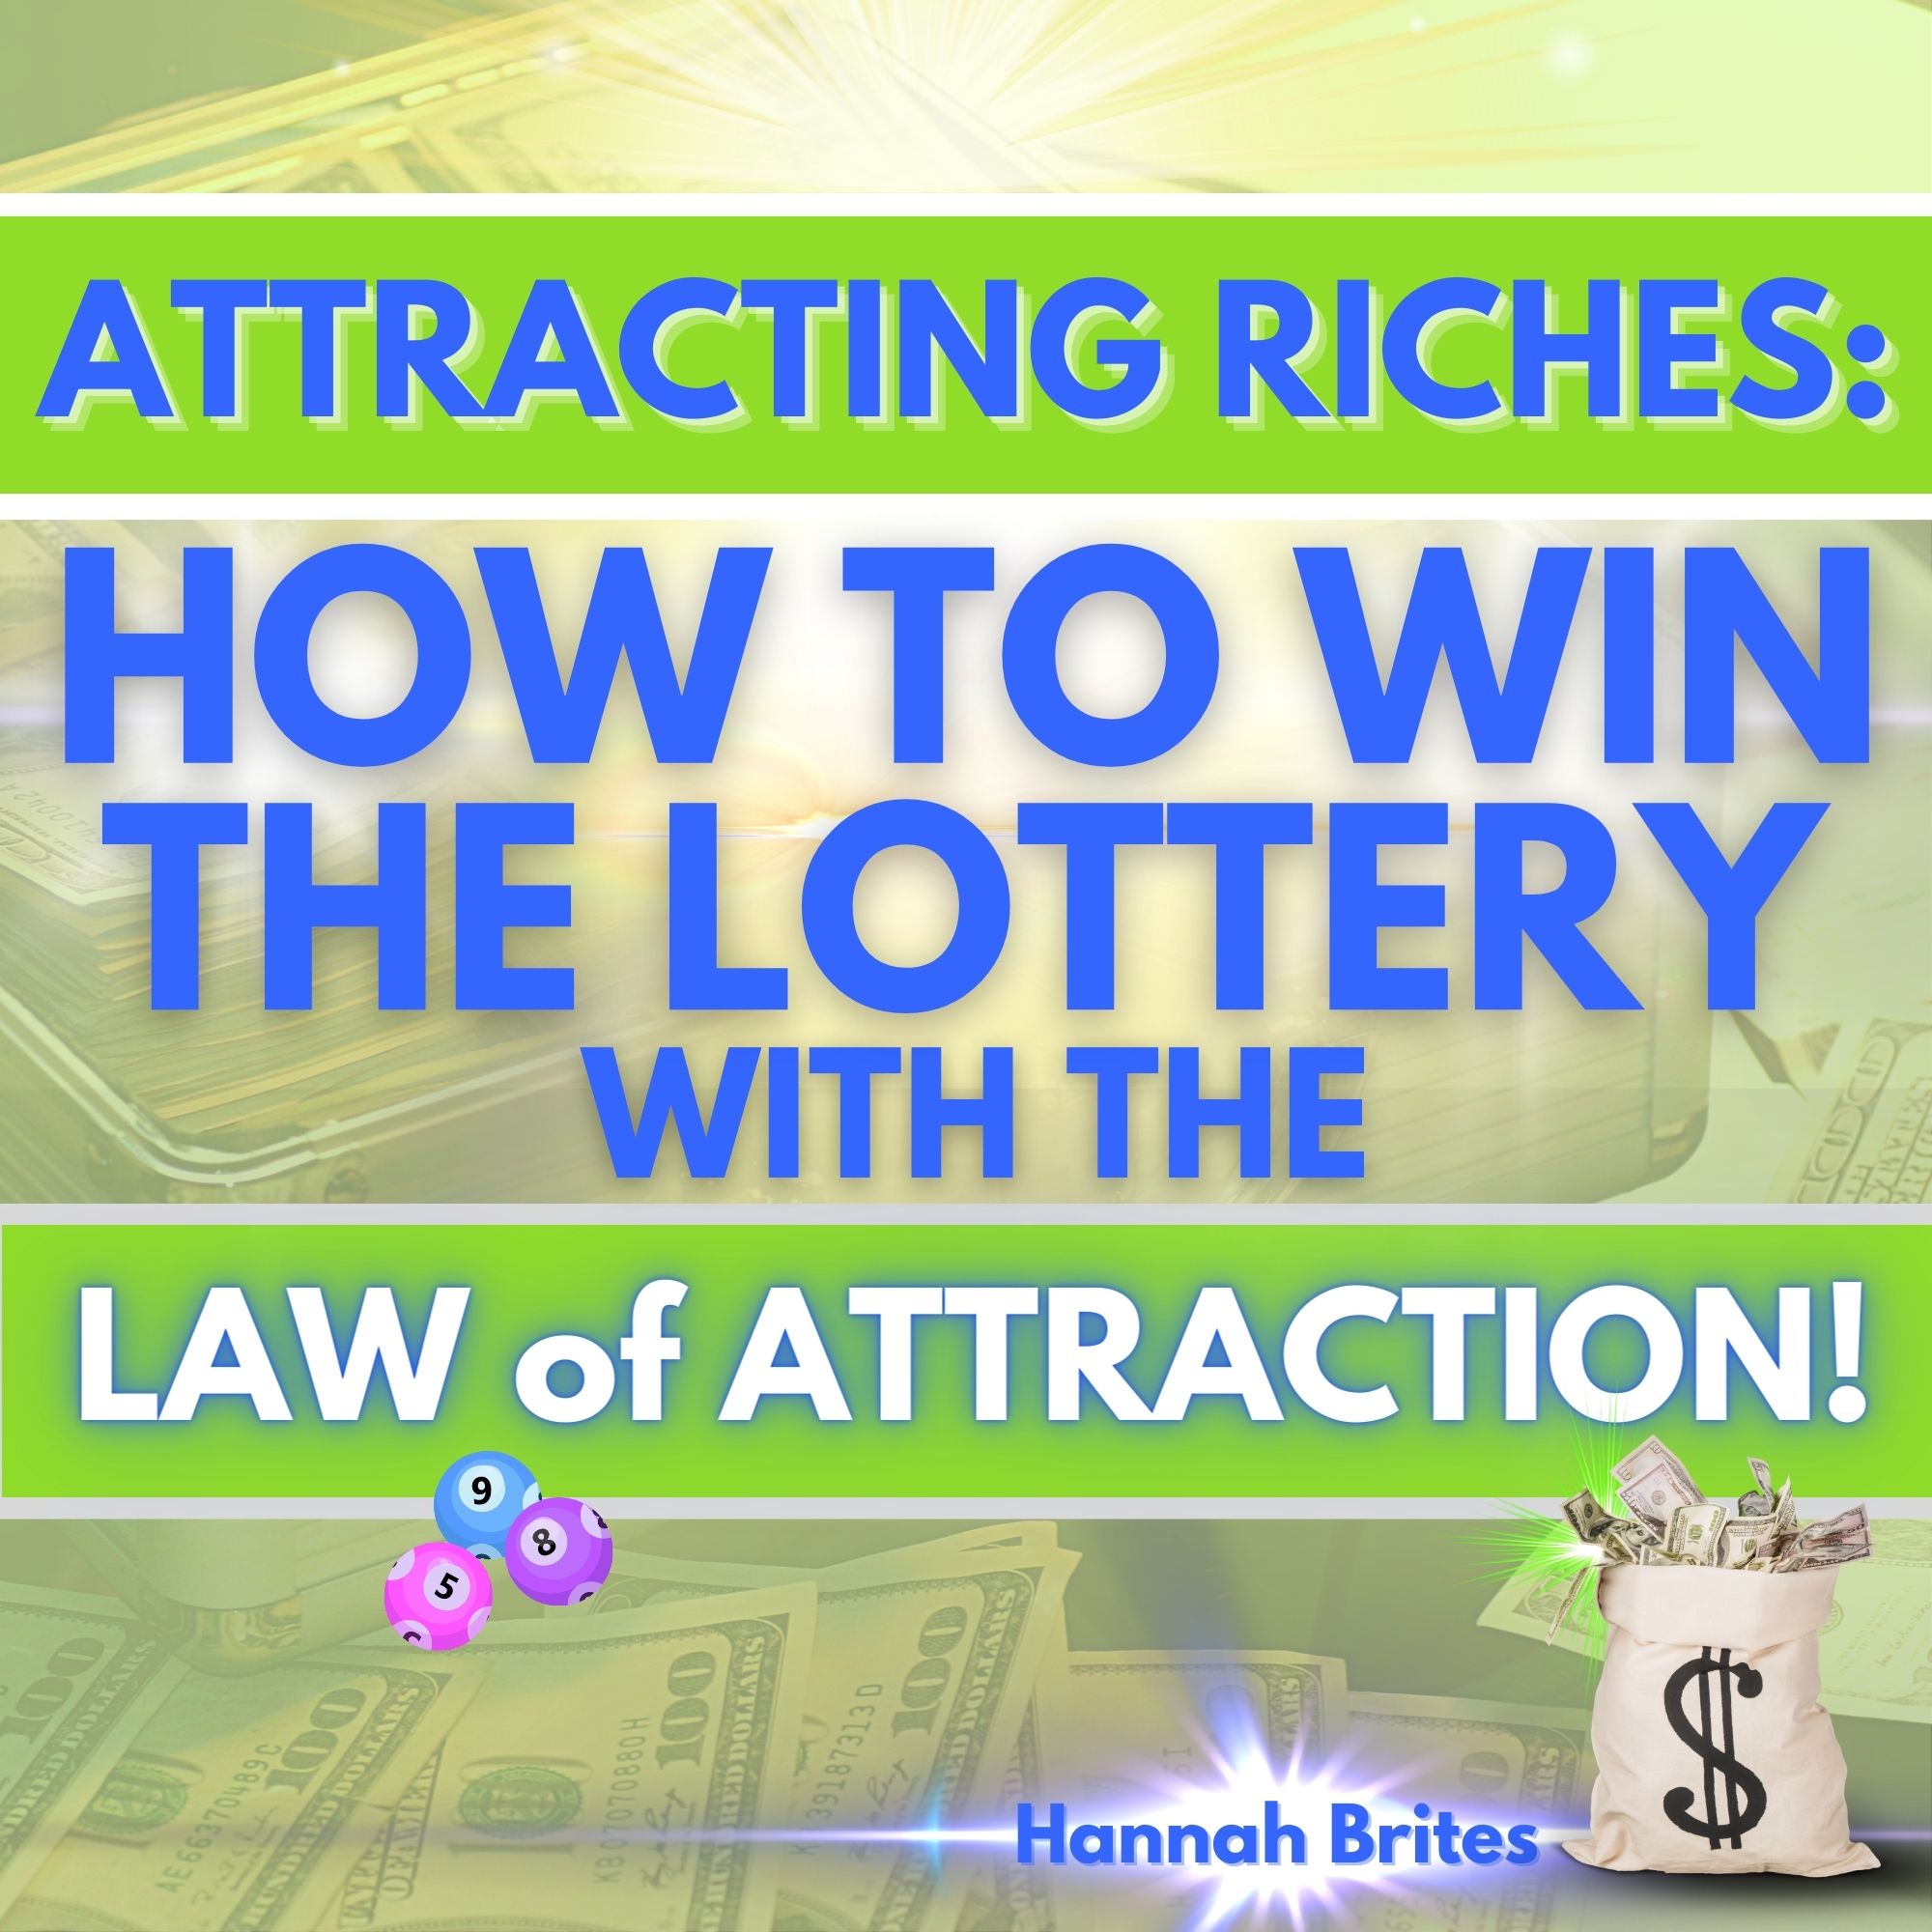 Attracting Riches:  How to win the lottery with the law of attraction